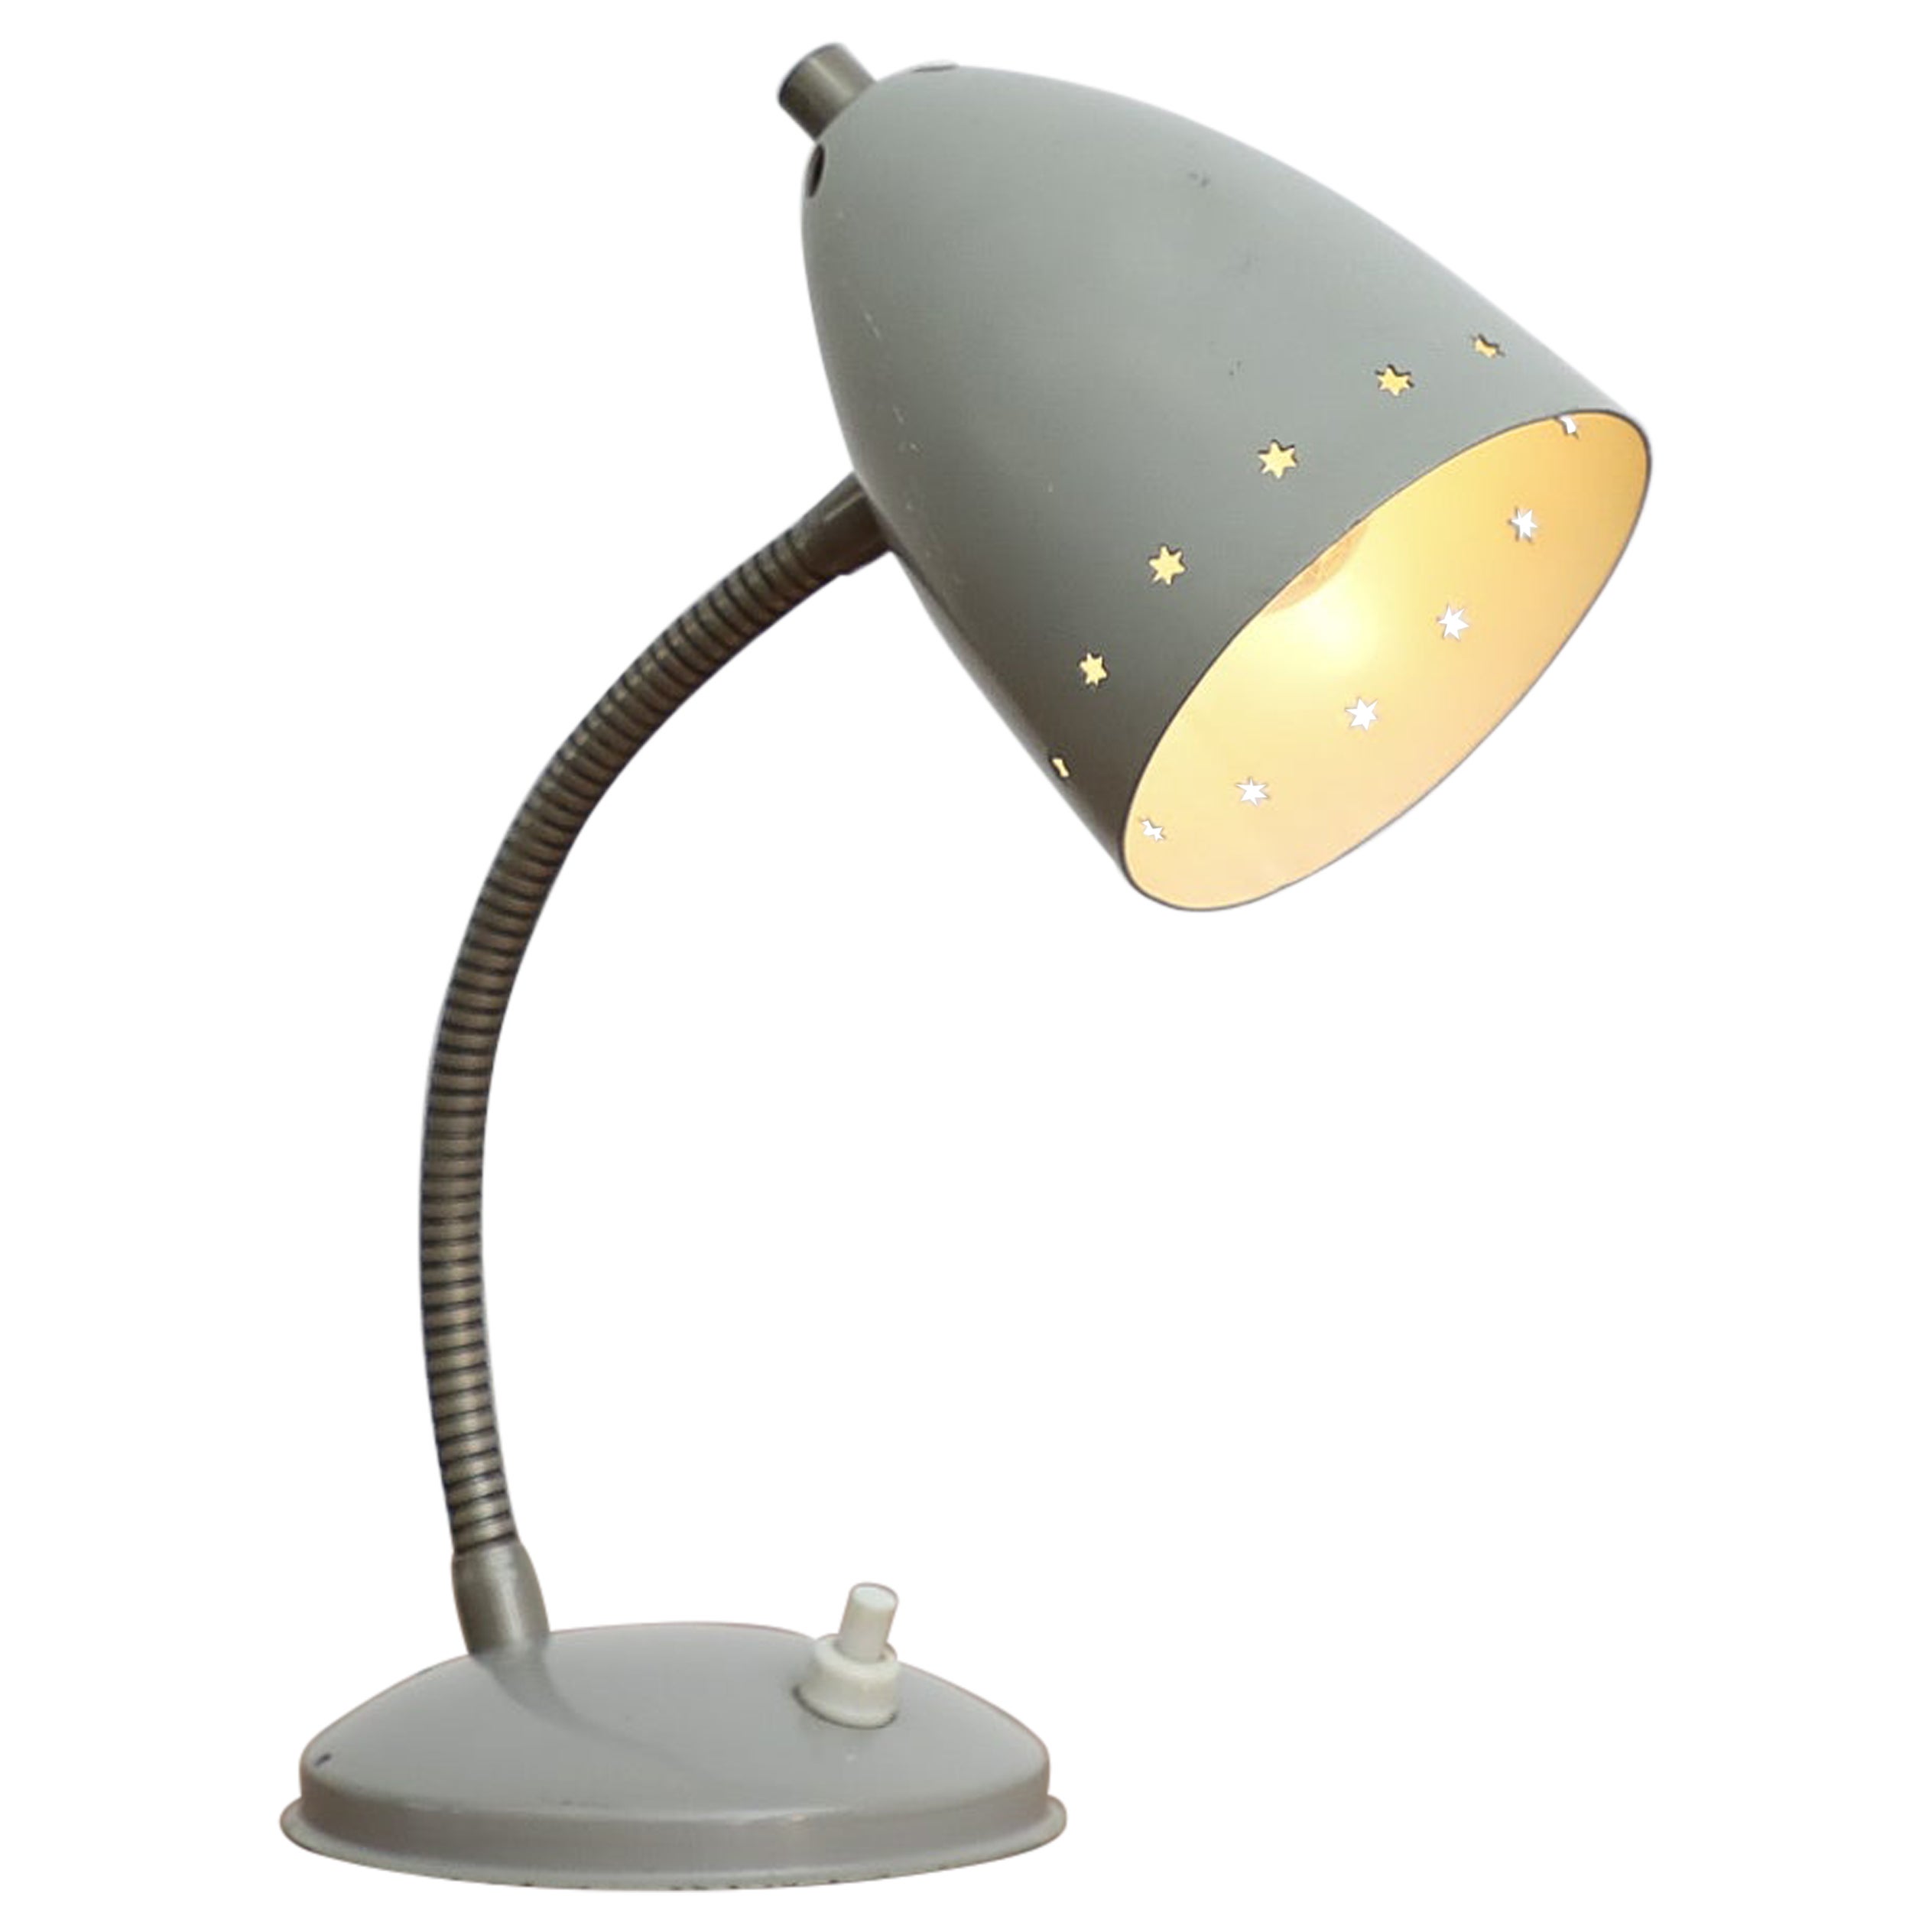 Little Grey Mid-Century Hala Zeist Reading Lamp with Star Cut-outs on Shade For Sale